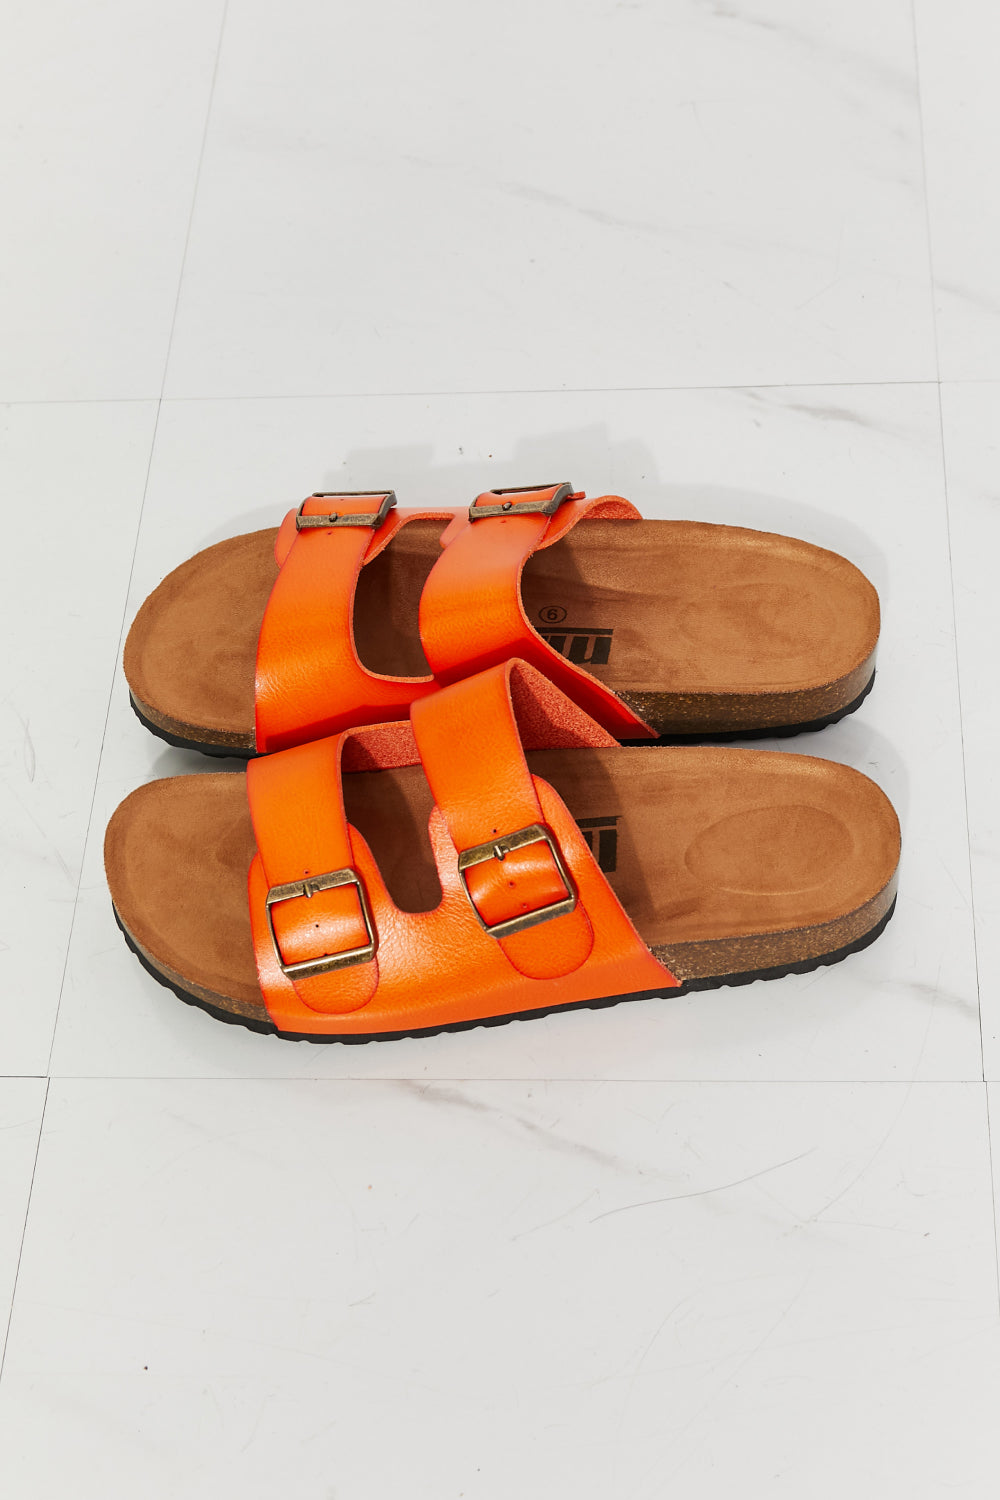 Light Gray MMShoes Feeling Alive Double Banded Slide Sandals in Orange Sentient Beauty Fashions shoes